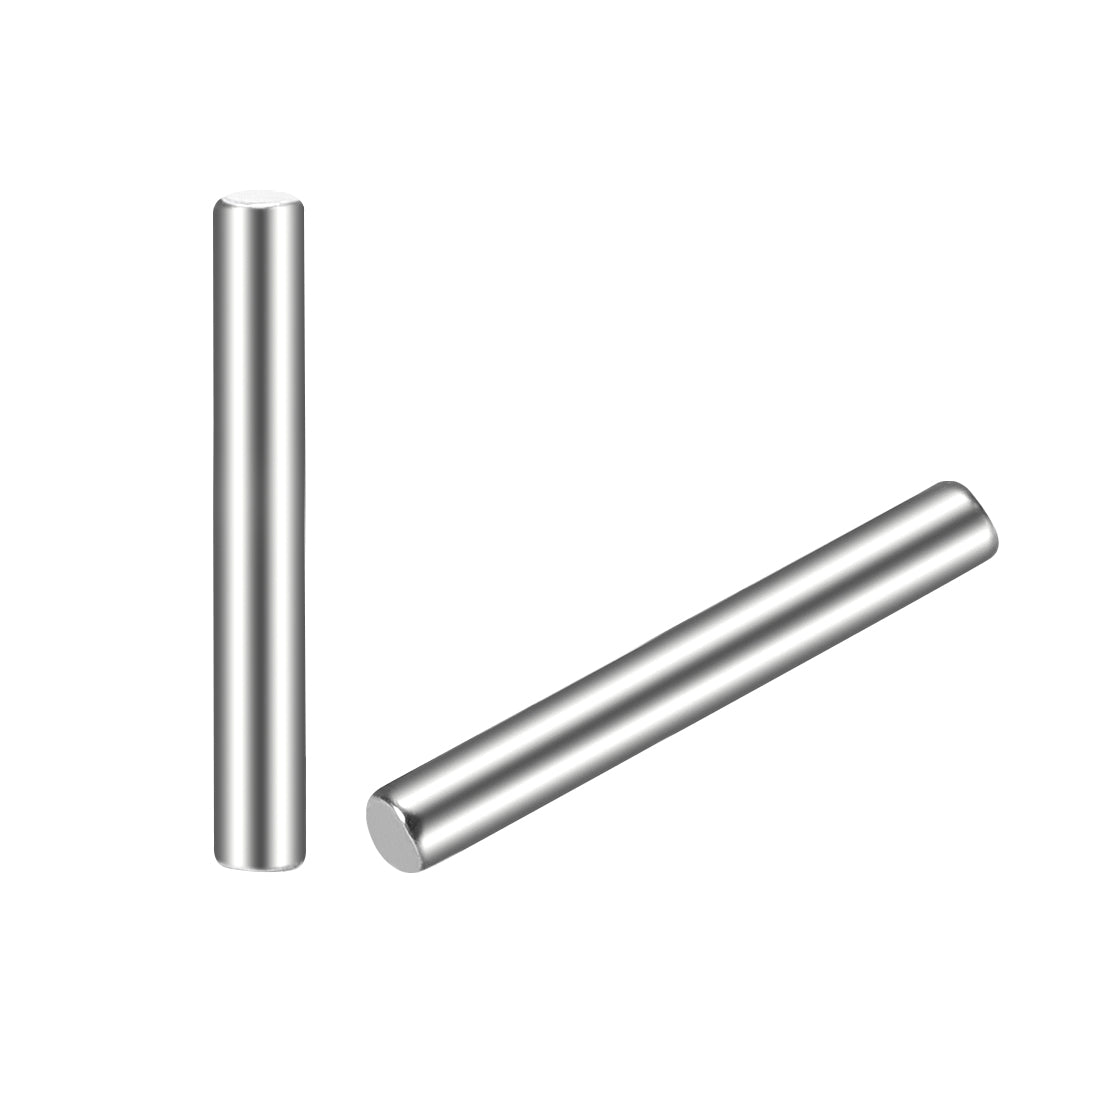 uxcell Uxcell 15Pcs Dowel Pin 304 Stainless Steel Cylindrical Shelf Support Pin Fasten Elements Silver Tone